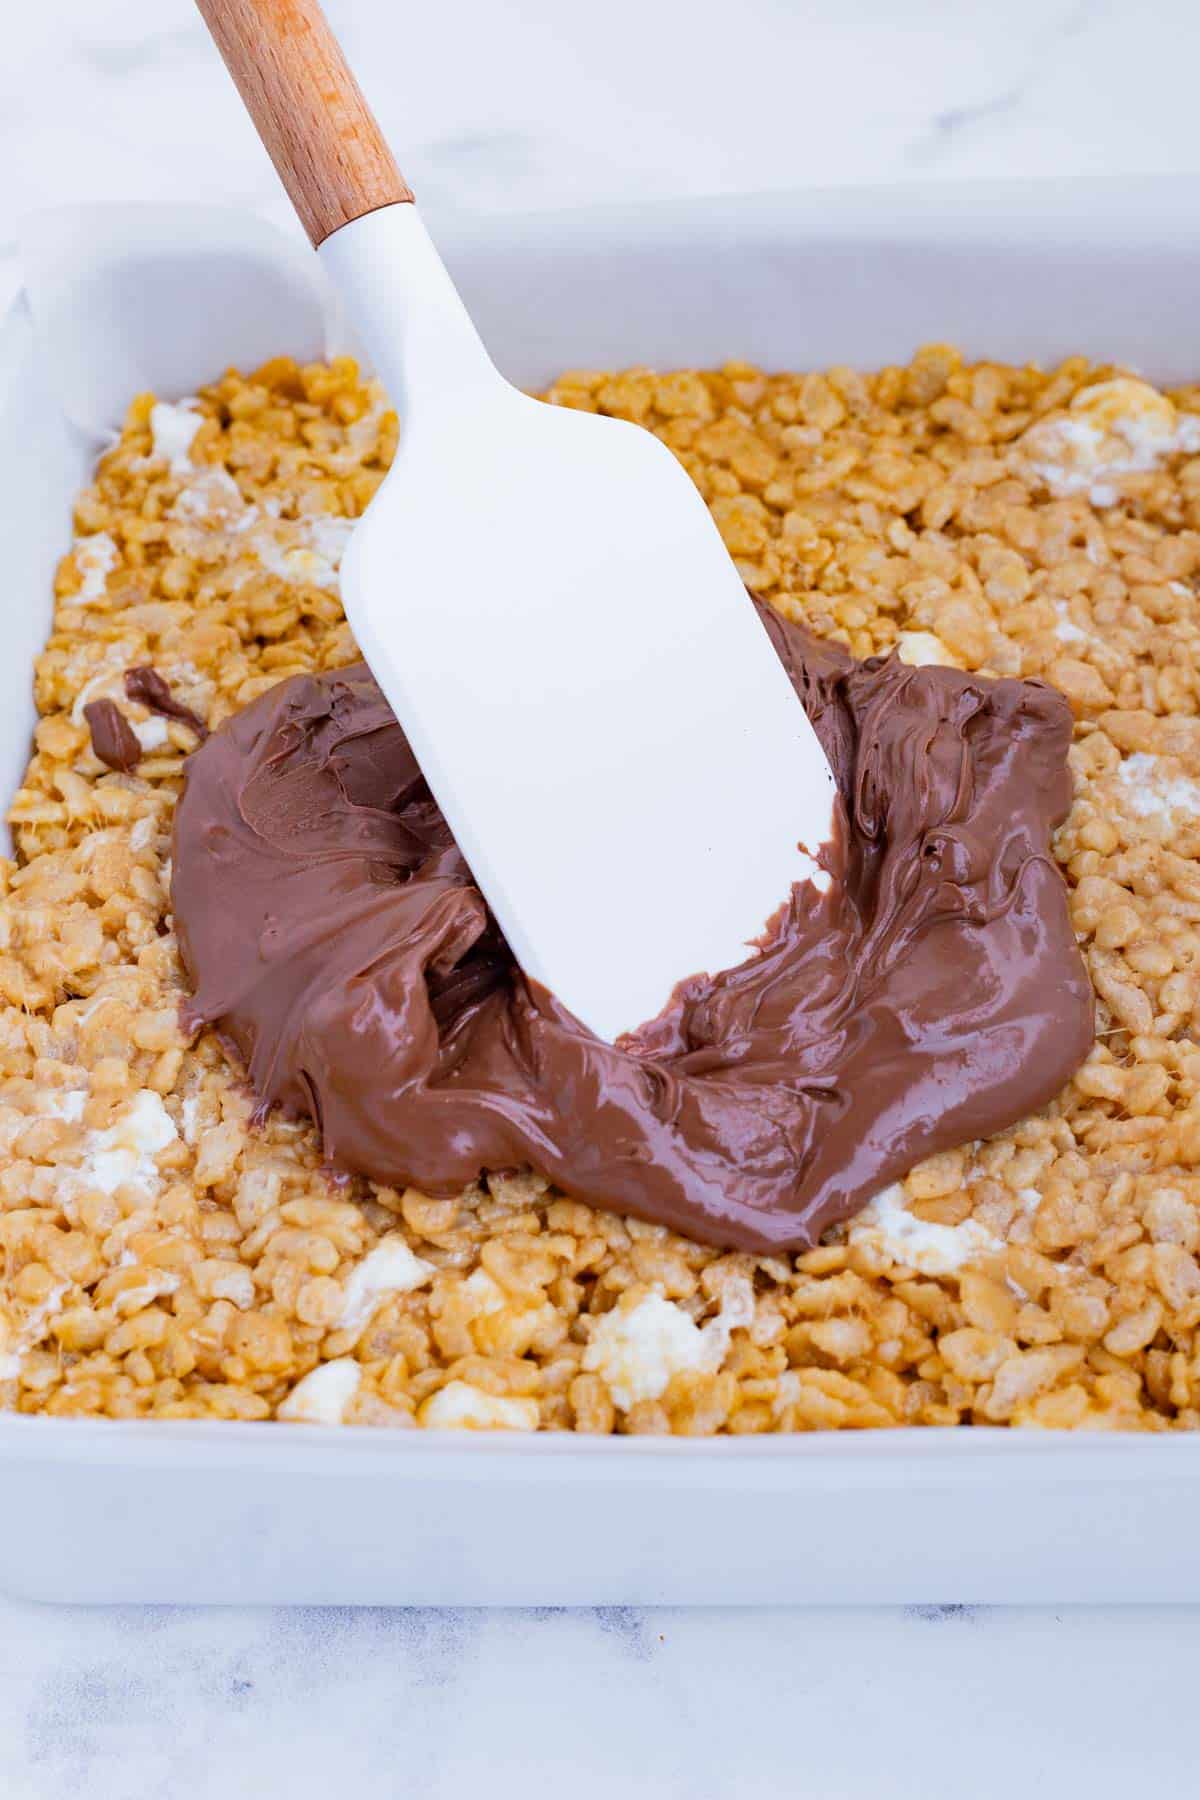 Melted chocolate is spread over the top of the treat.